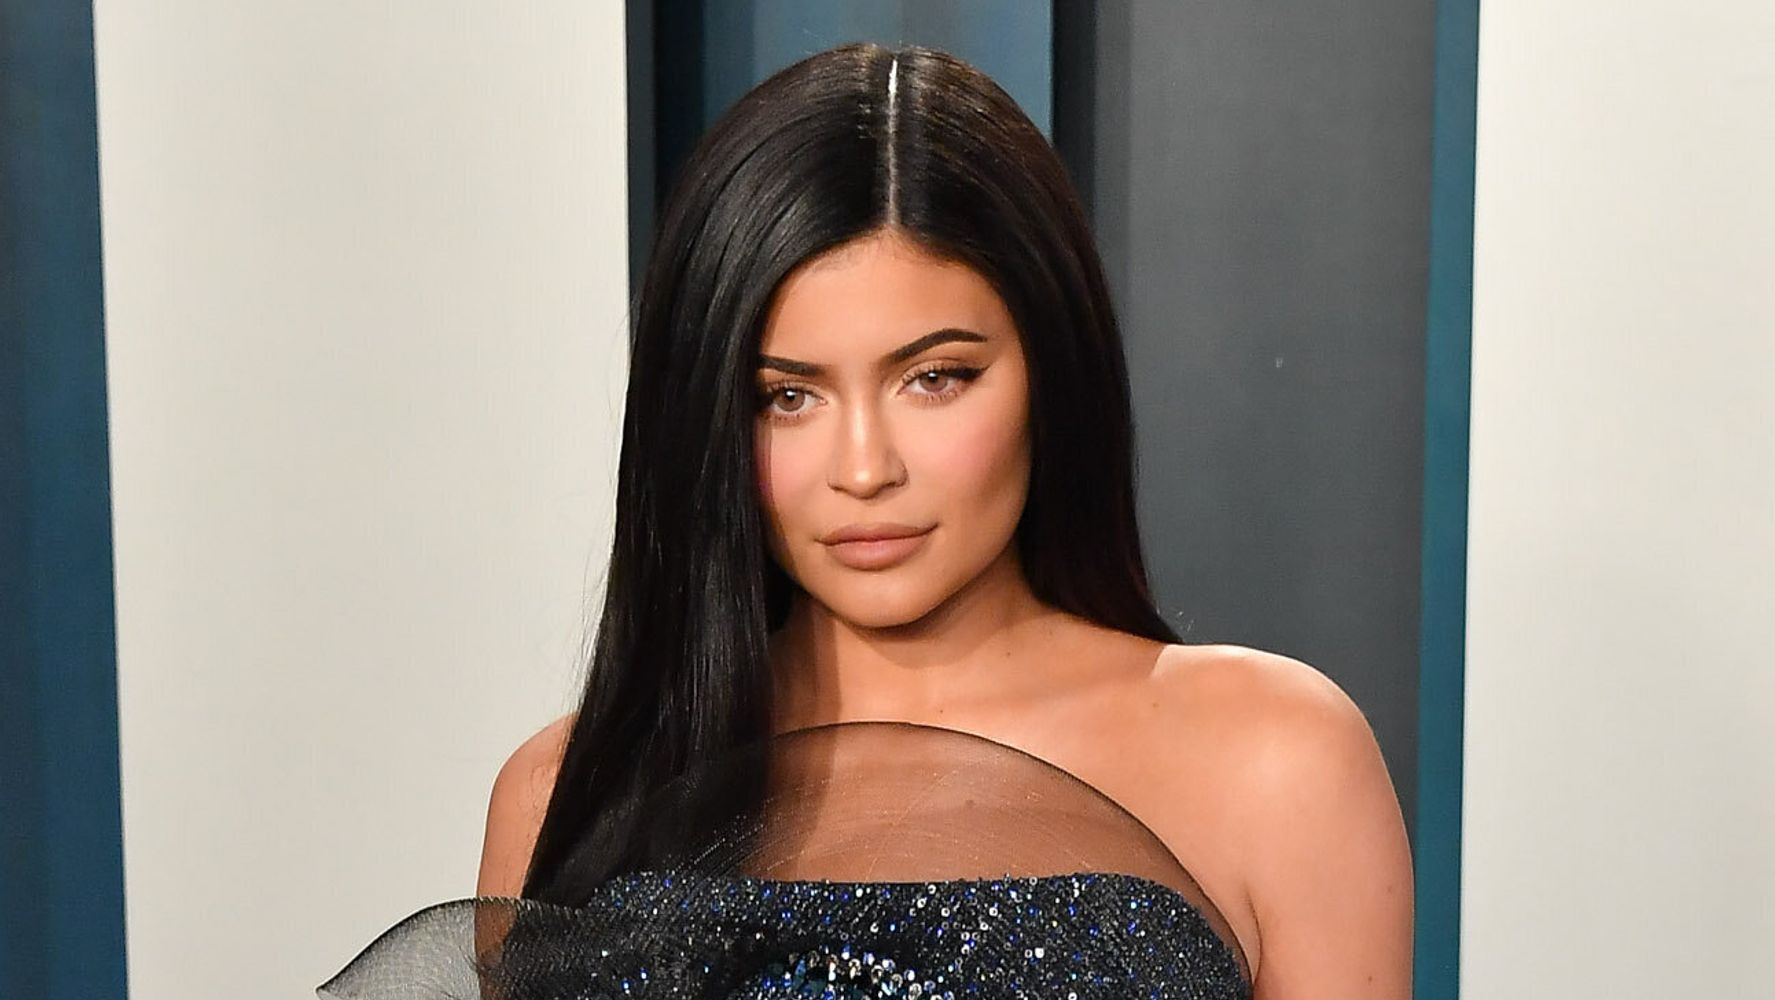 Kylie Jenner collapsed because she asked for donations to pay for the stylist’s surgery